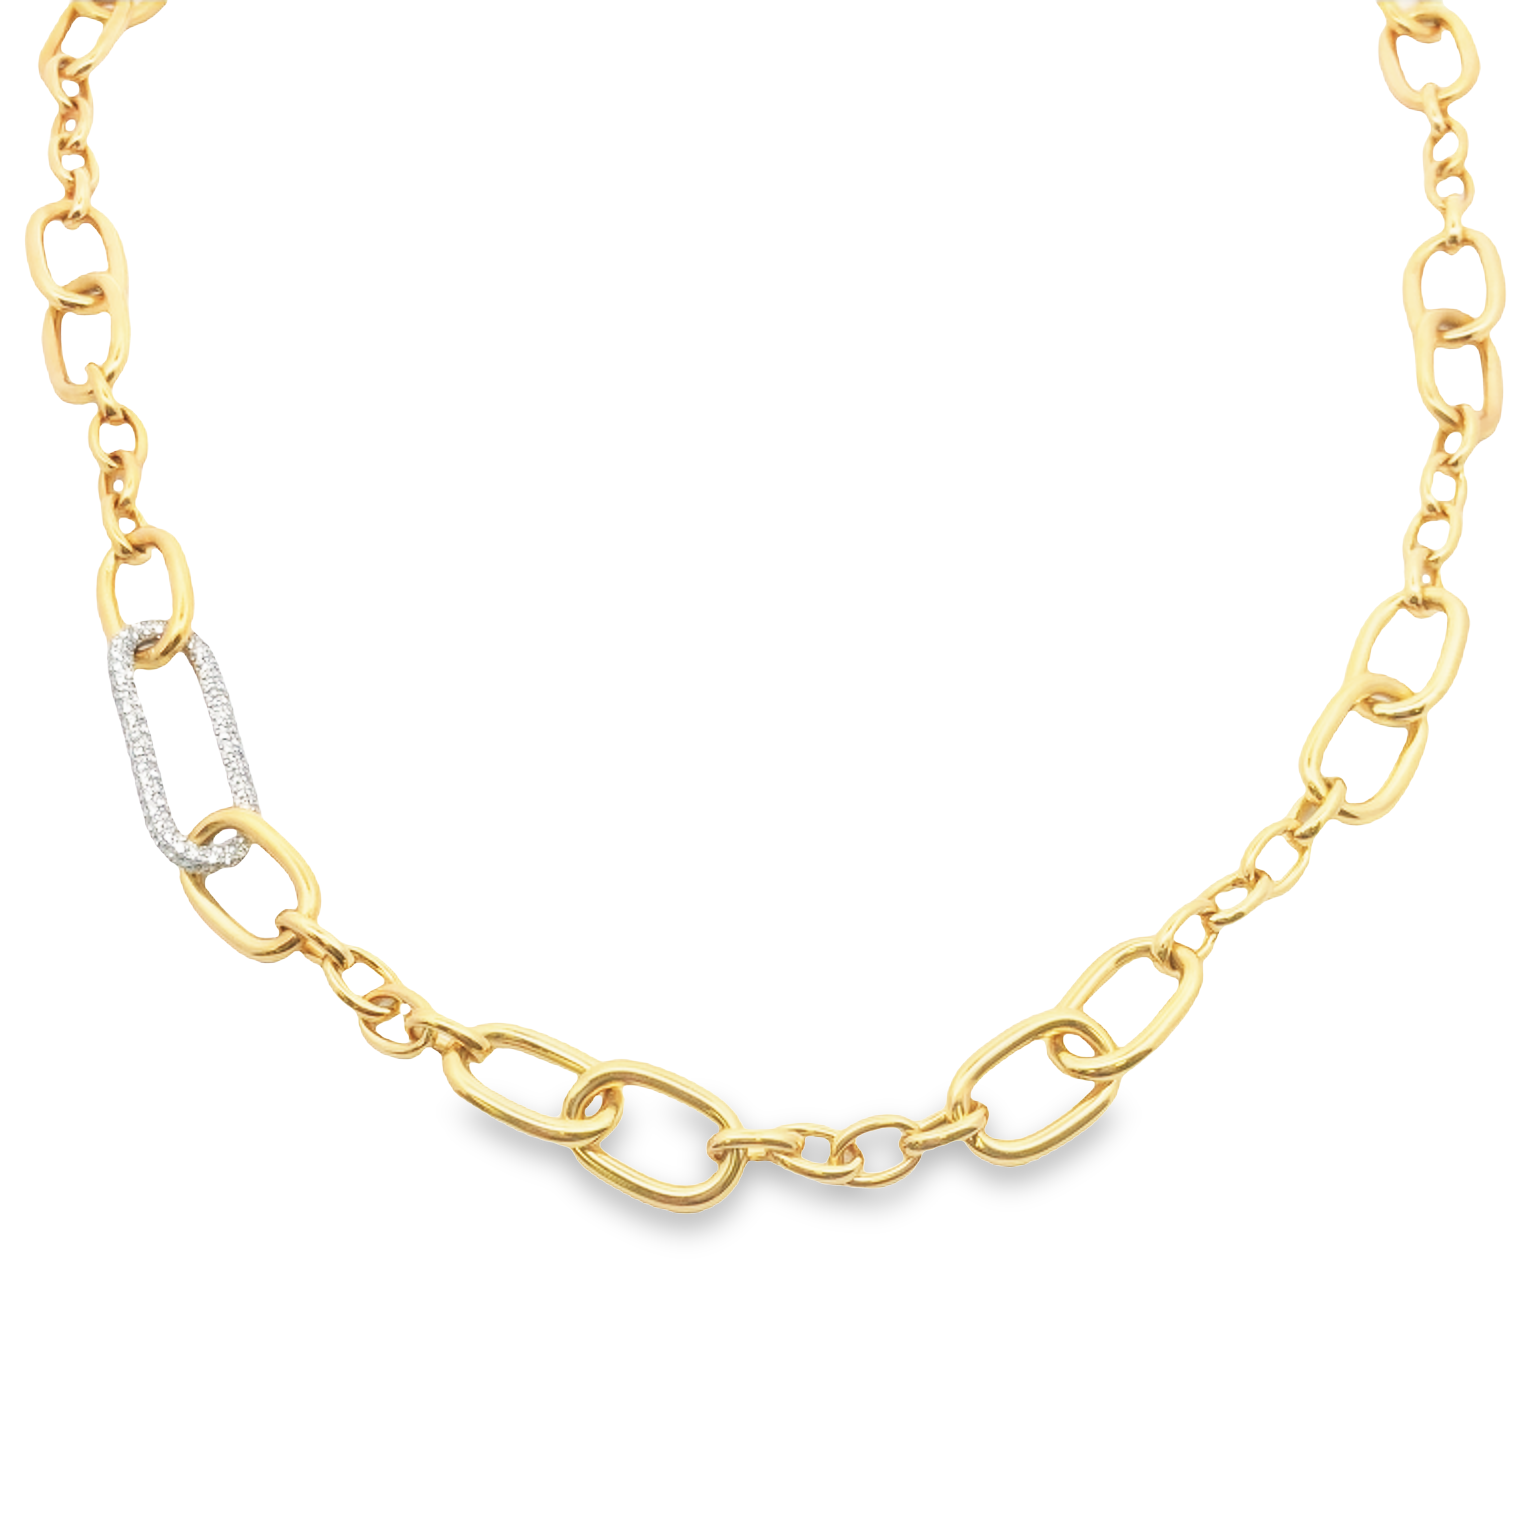 18K Yellow and White Gold Diamond Oval Link Necklace